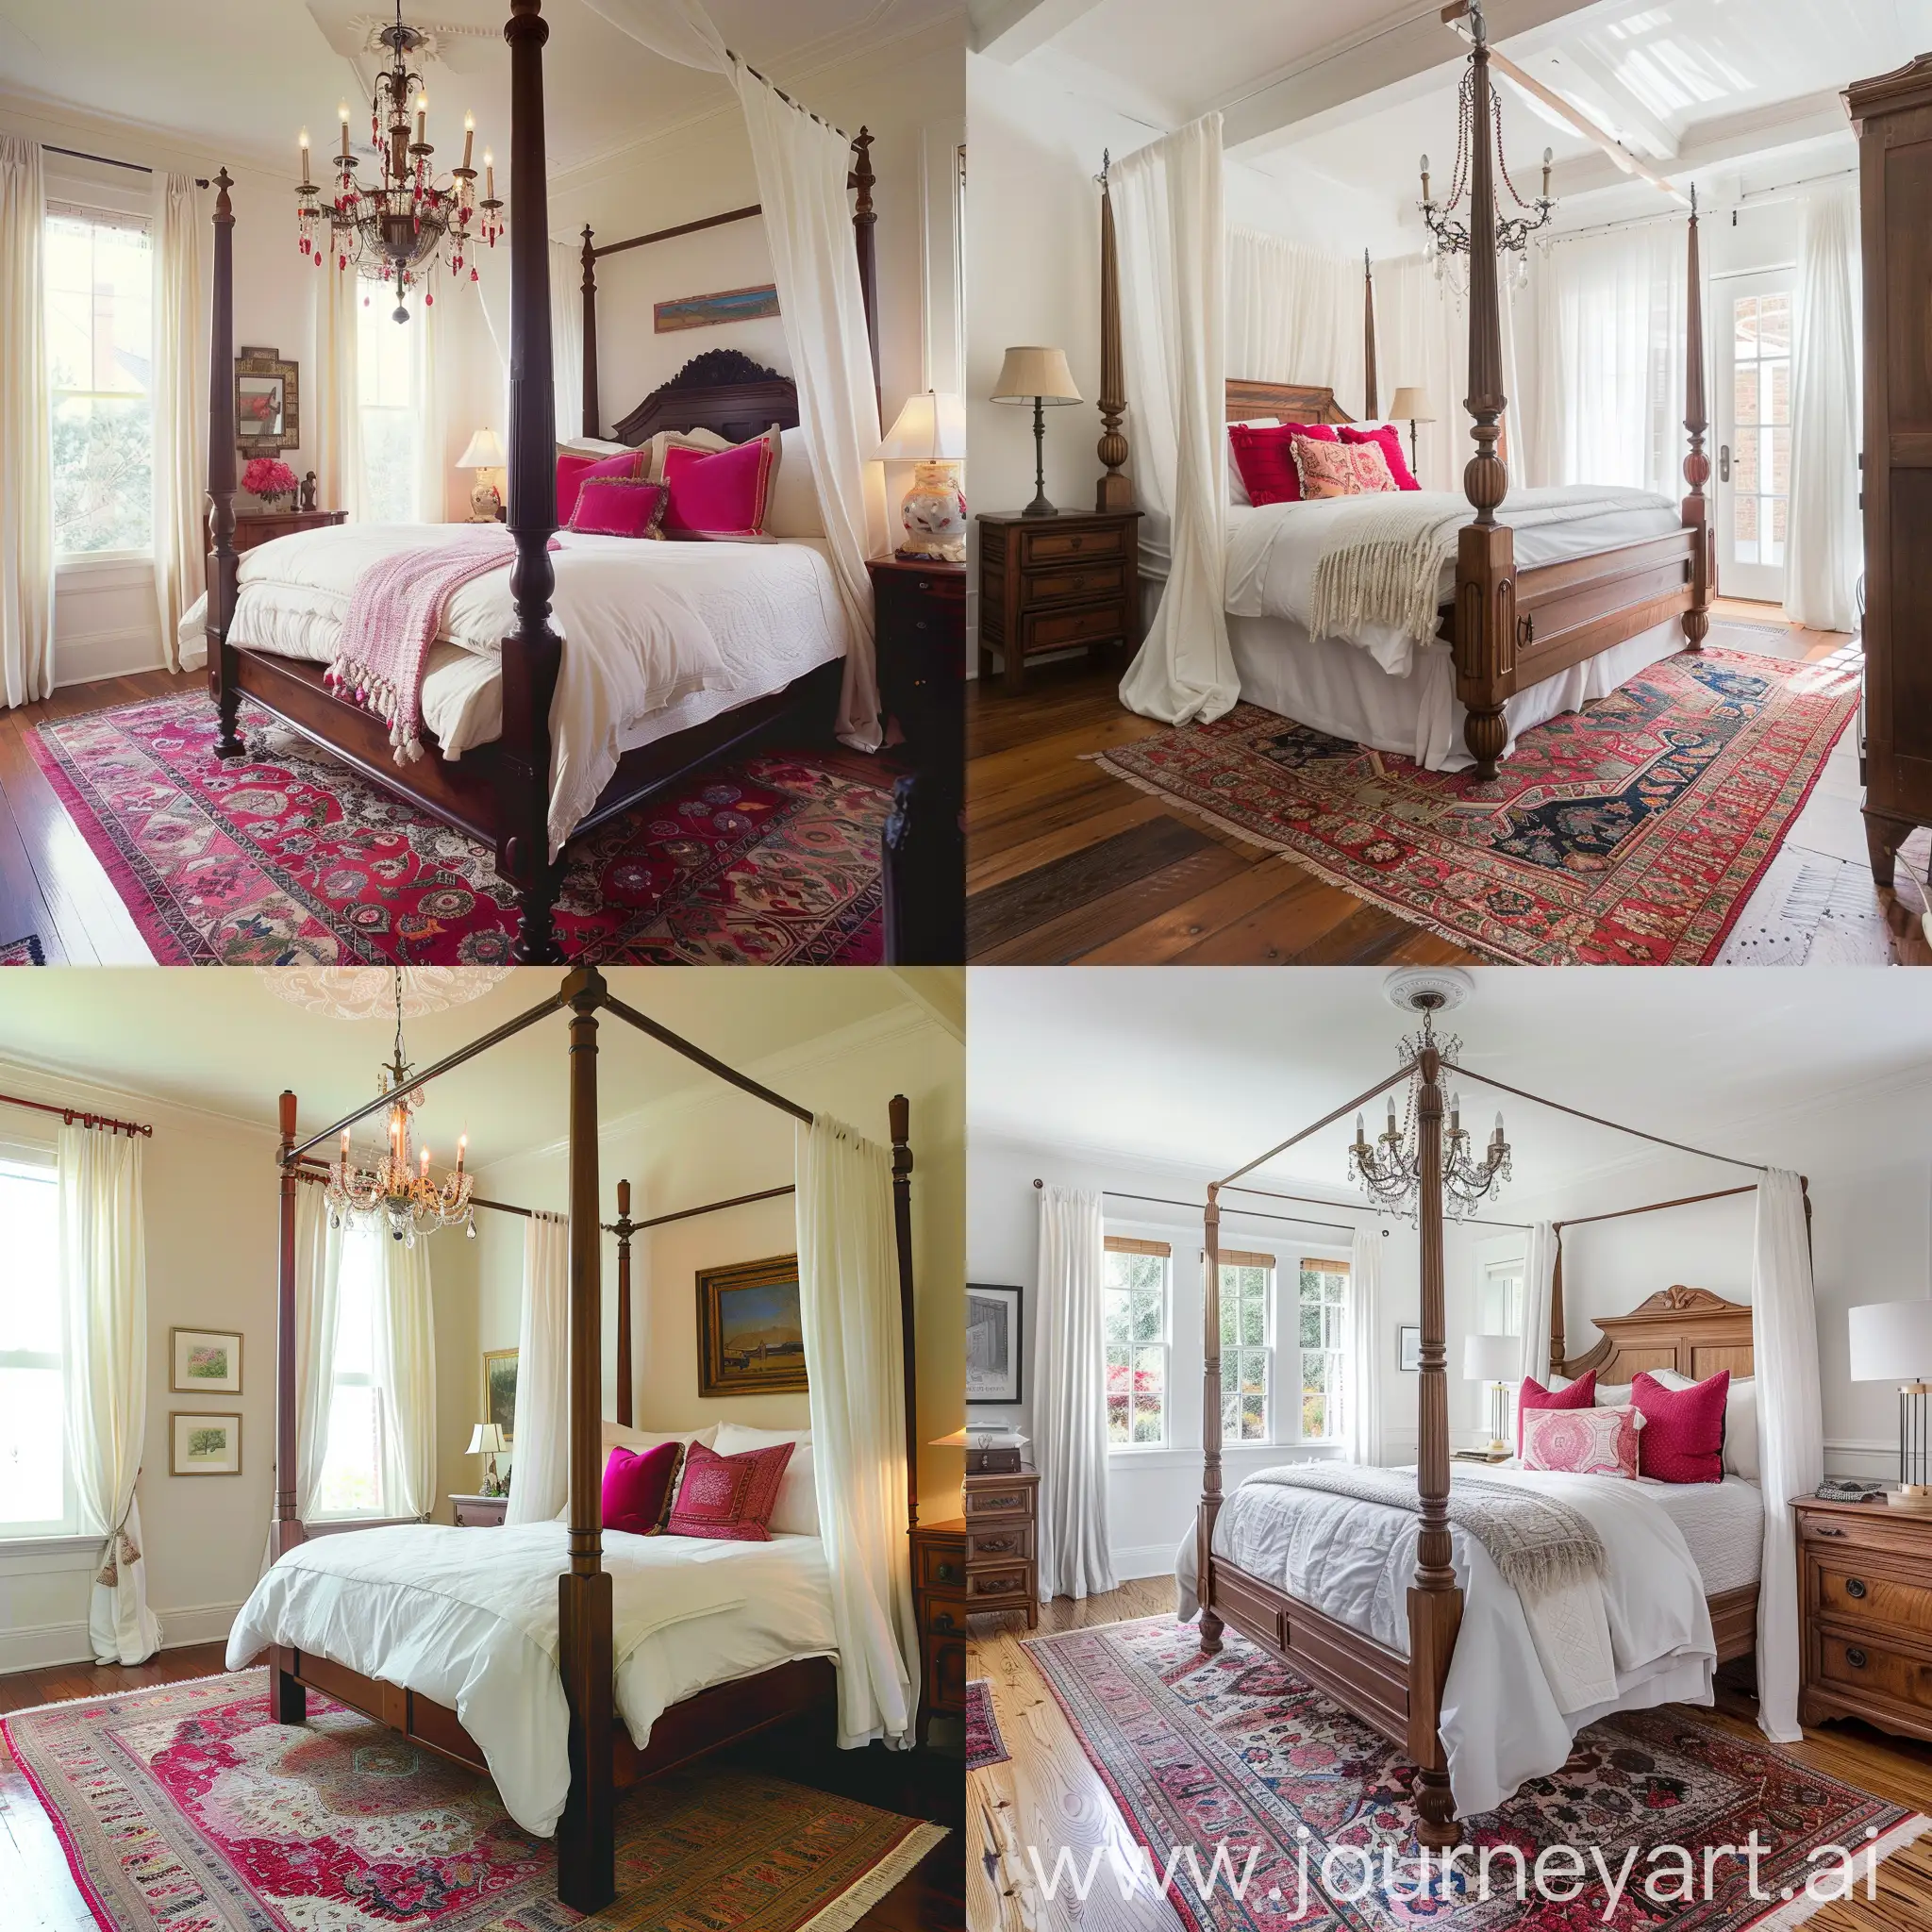 Luxurious-Bedroom-with-Canopy-Bed-White-Linens-and-Antique-Nightstands